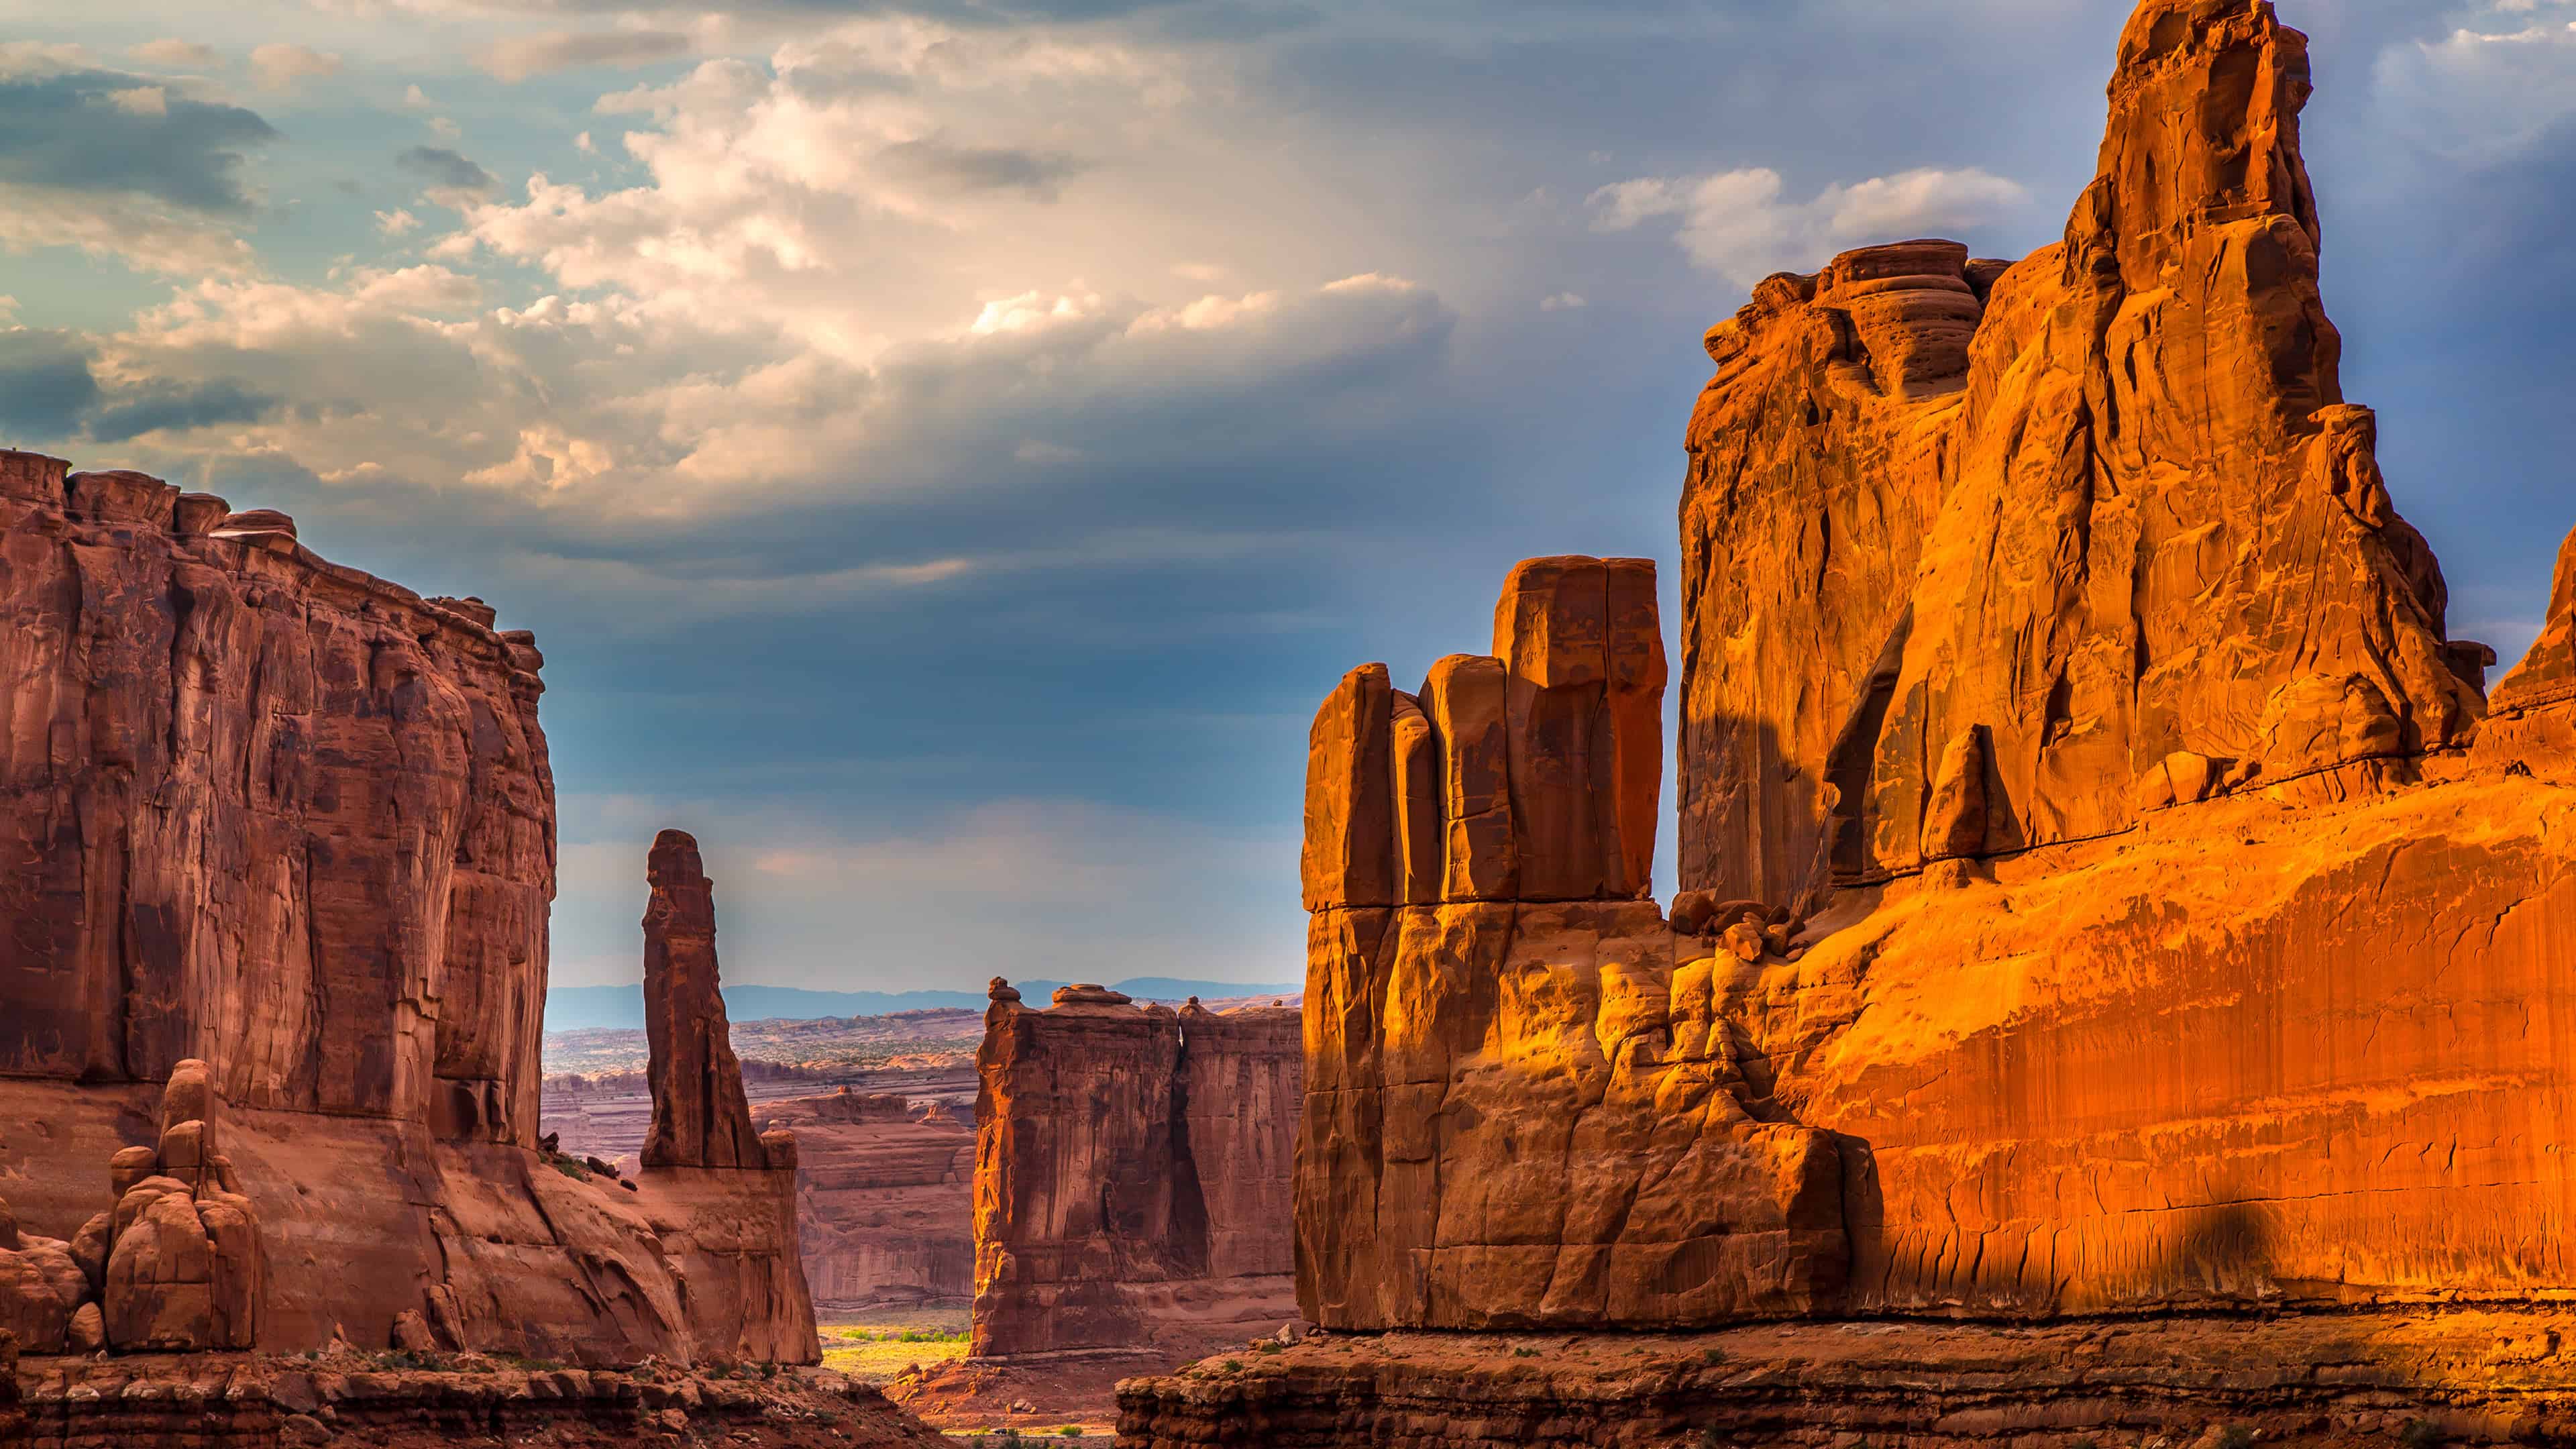 Courthouse Towers Arches National Park Utah United States UHD 4K Wallpaper